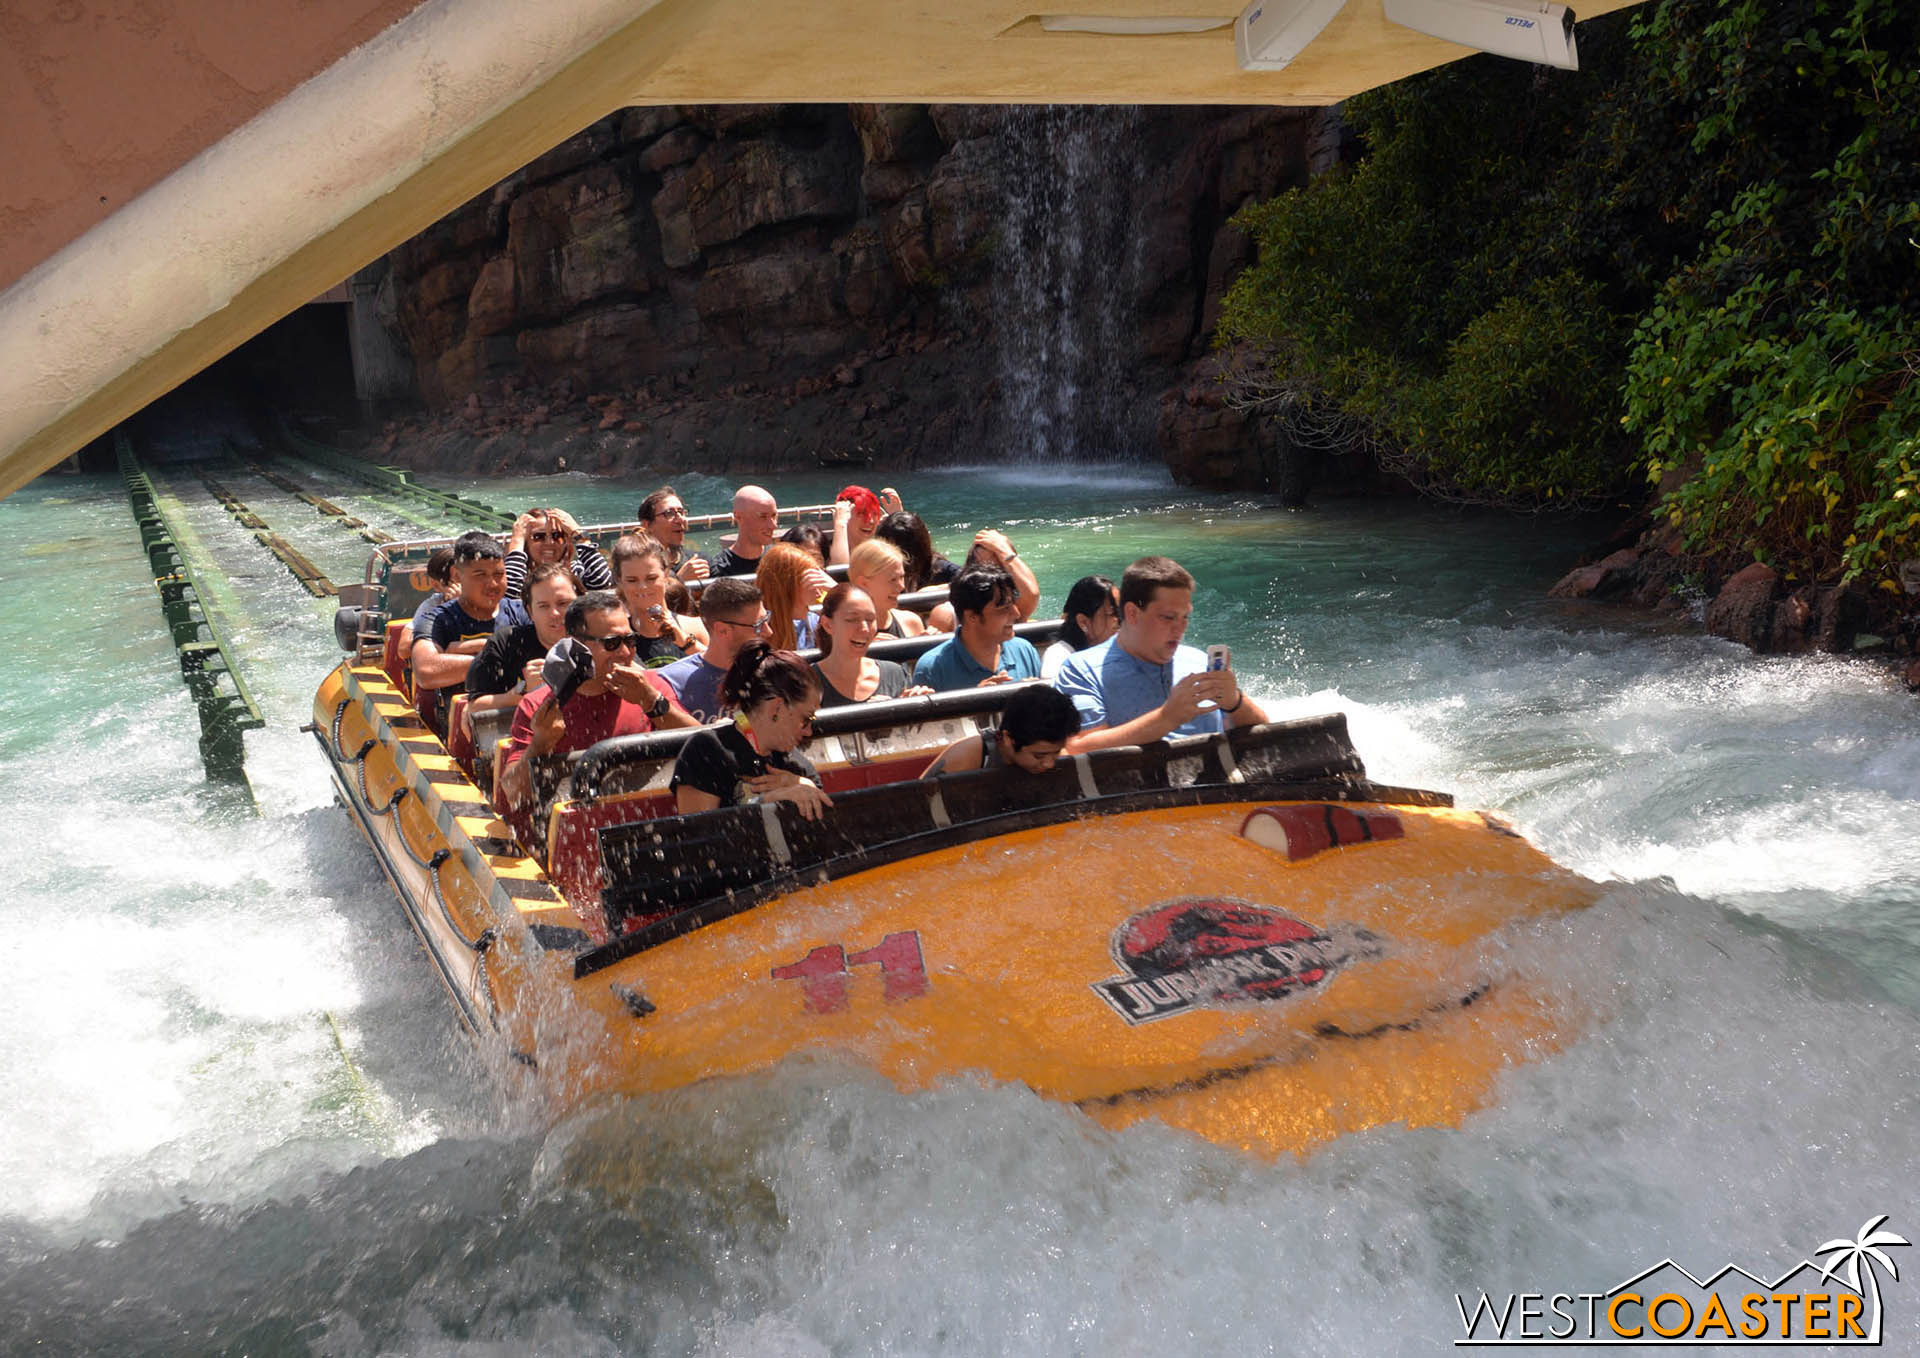  Hey, dude, Y U on your phone on water ride?? 